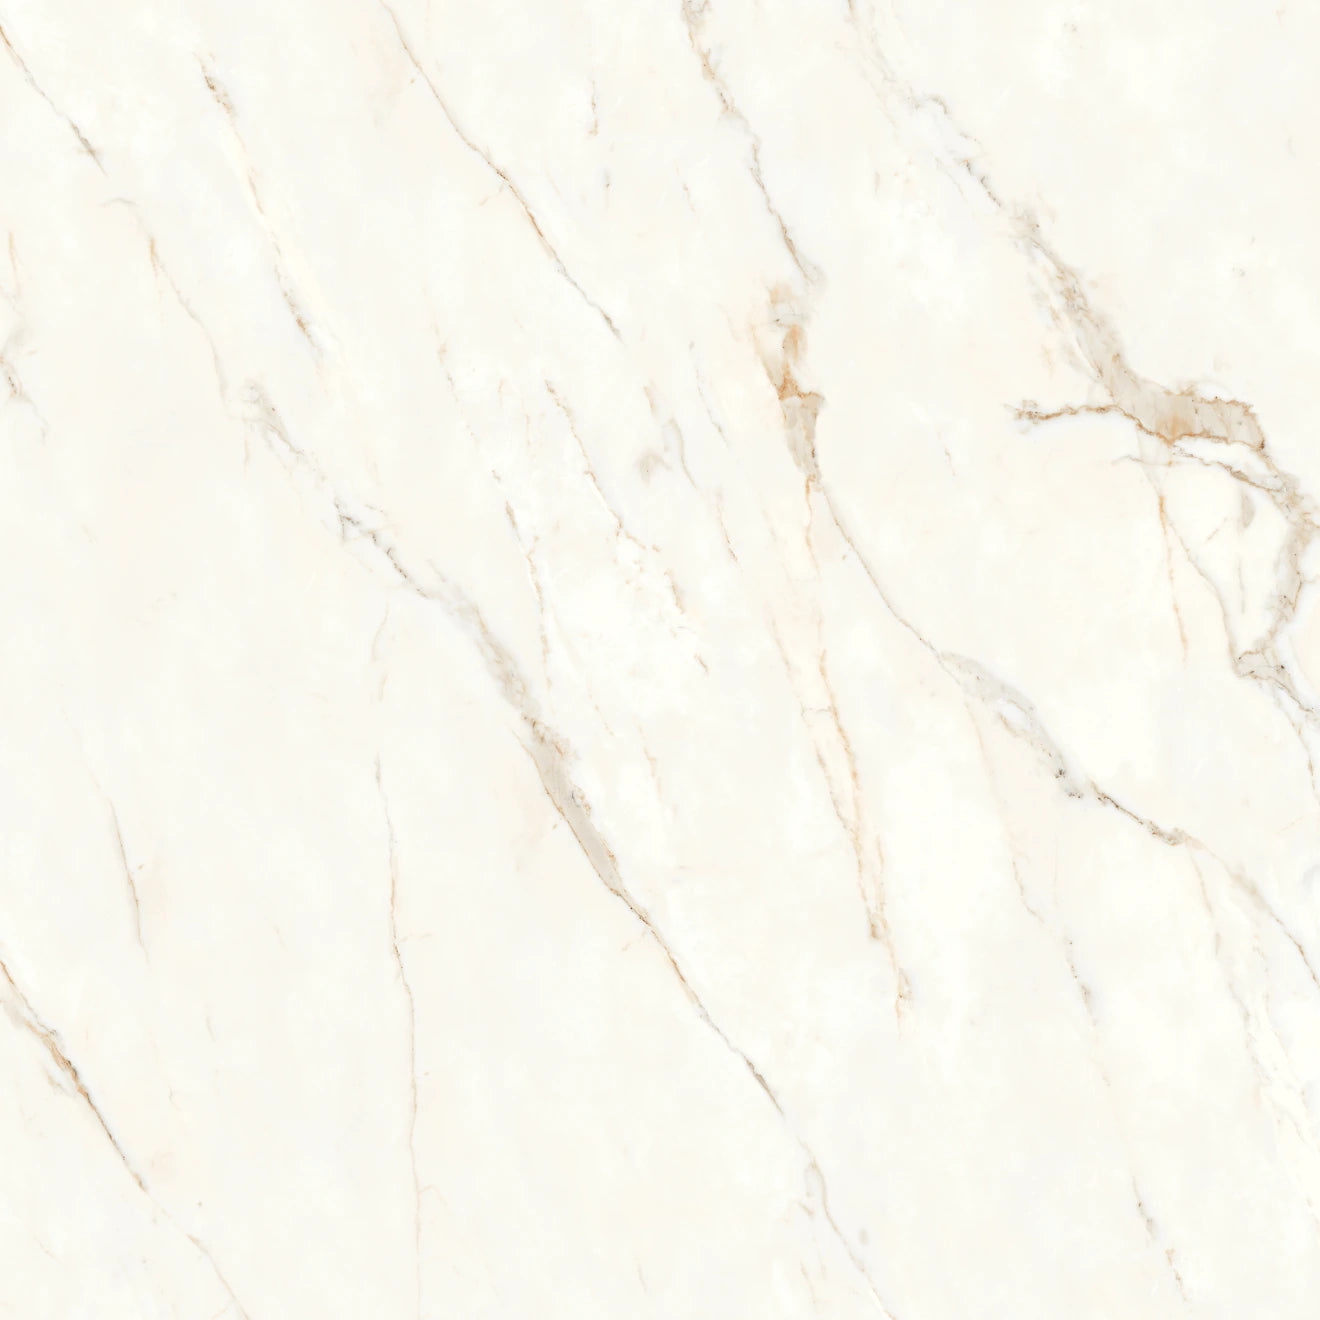 Bedrosians - Magnifica Nineteen Forty-Eight - 48" x 48" Glazed Porcelain Tile - Calacatta Oro Polished